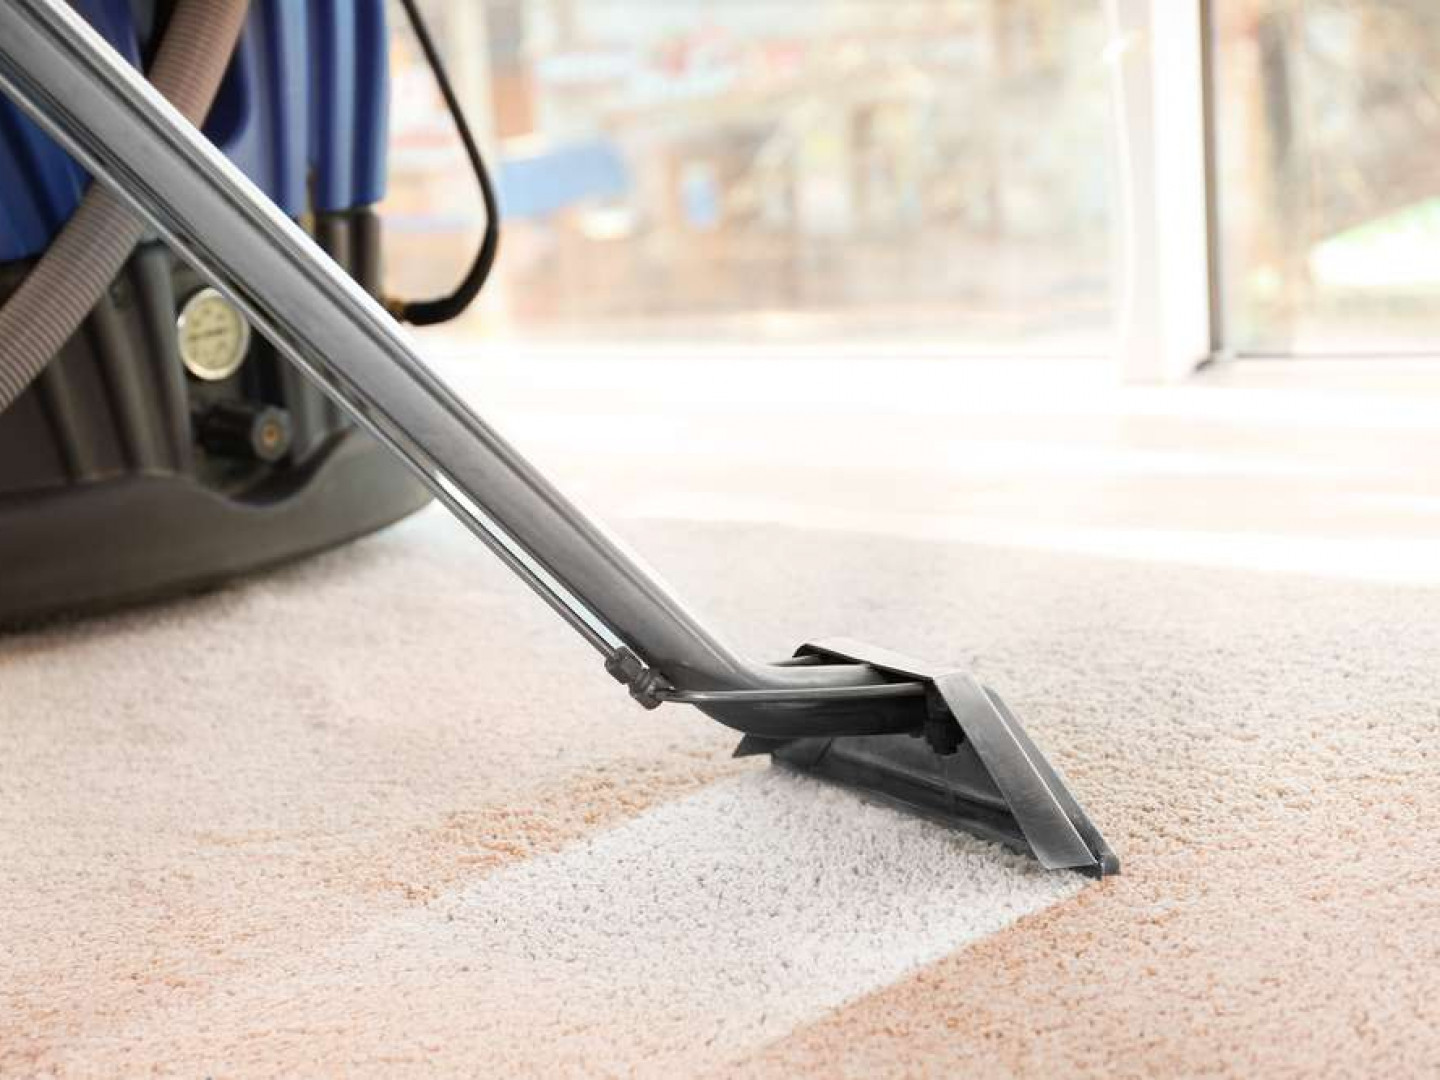 carpet cleaning wand during extraction